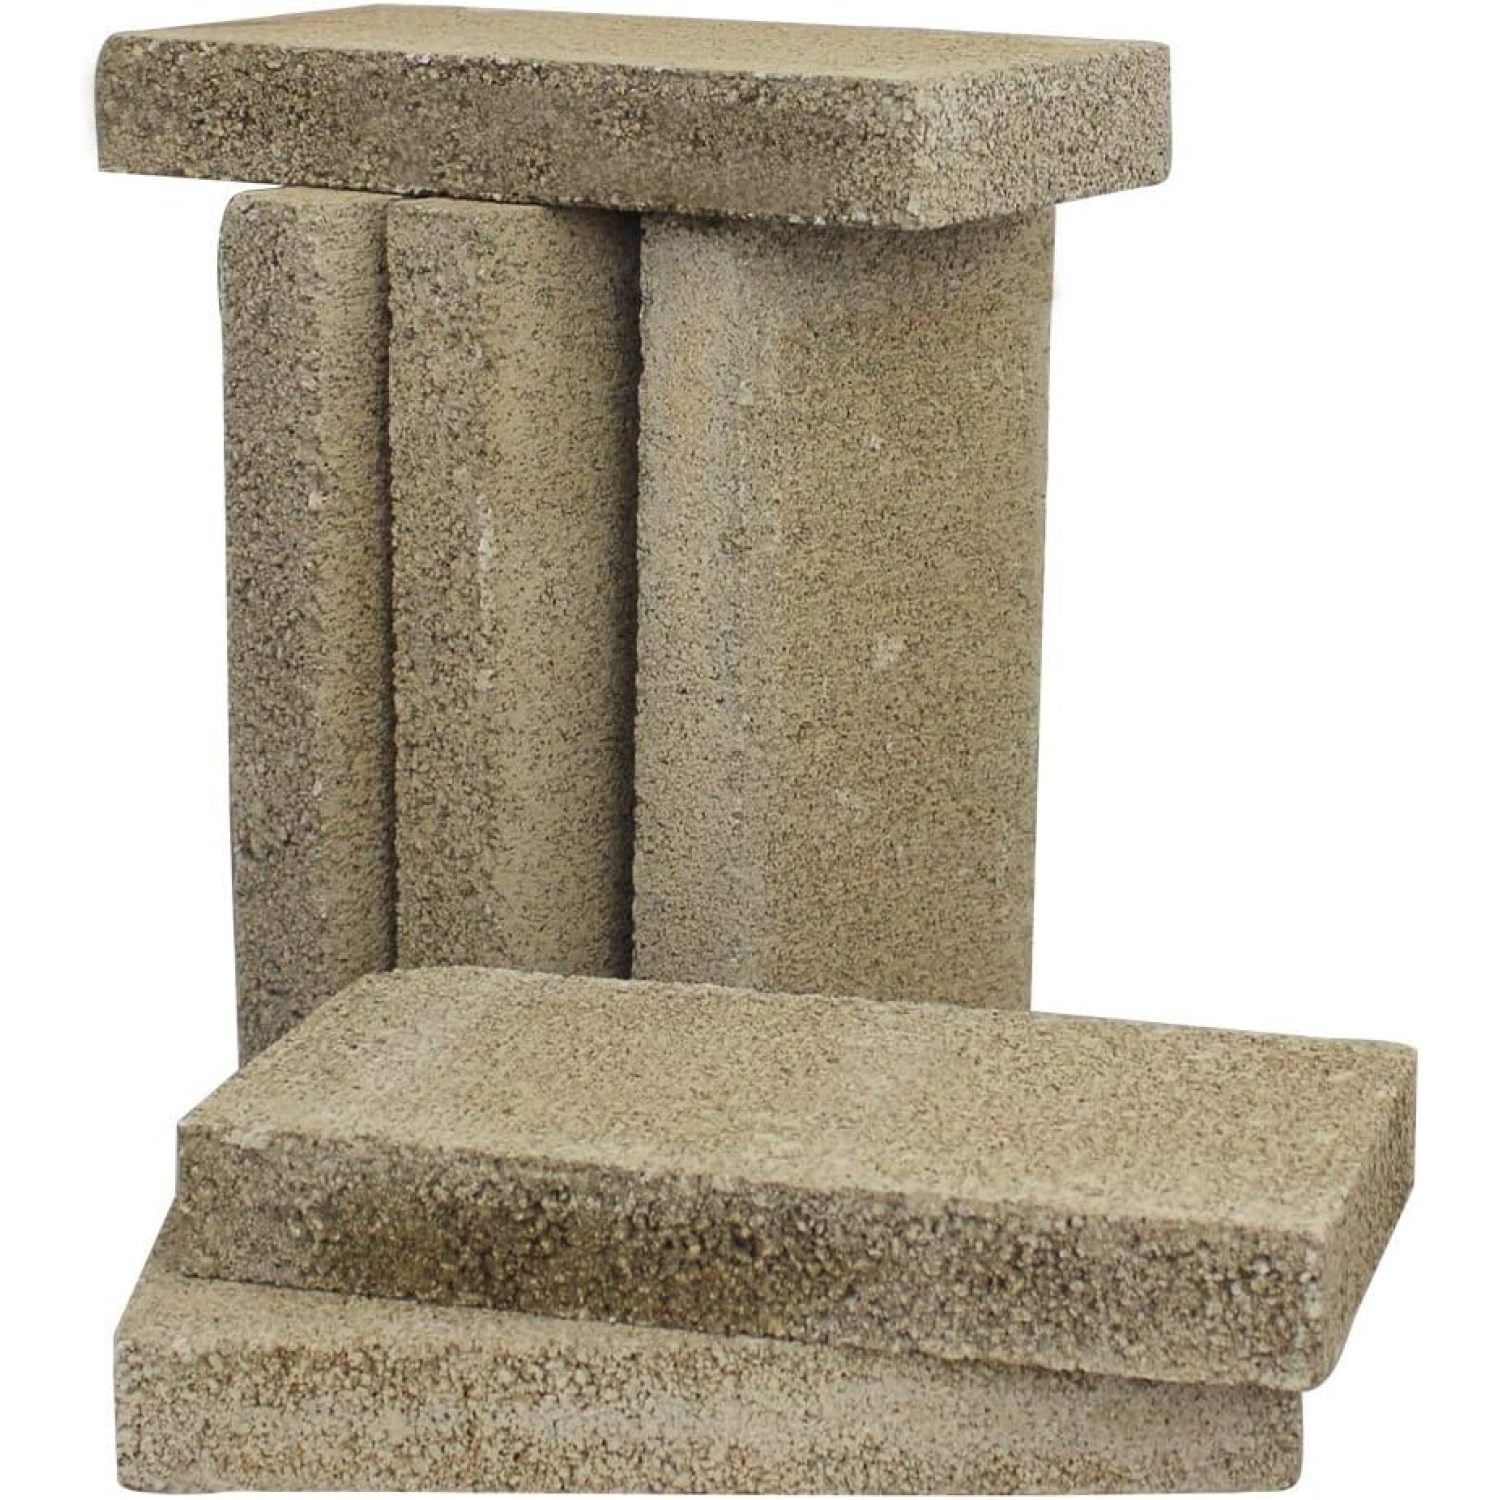 Hy-C Medium-Duty Fire Bricks, 9 in. x 4-1/2 x 1-1/4 in., 3-Pack at Tractor  Supply Co.